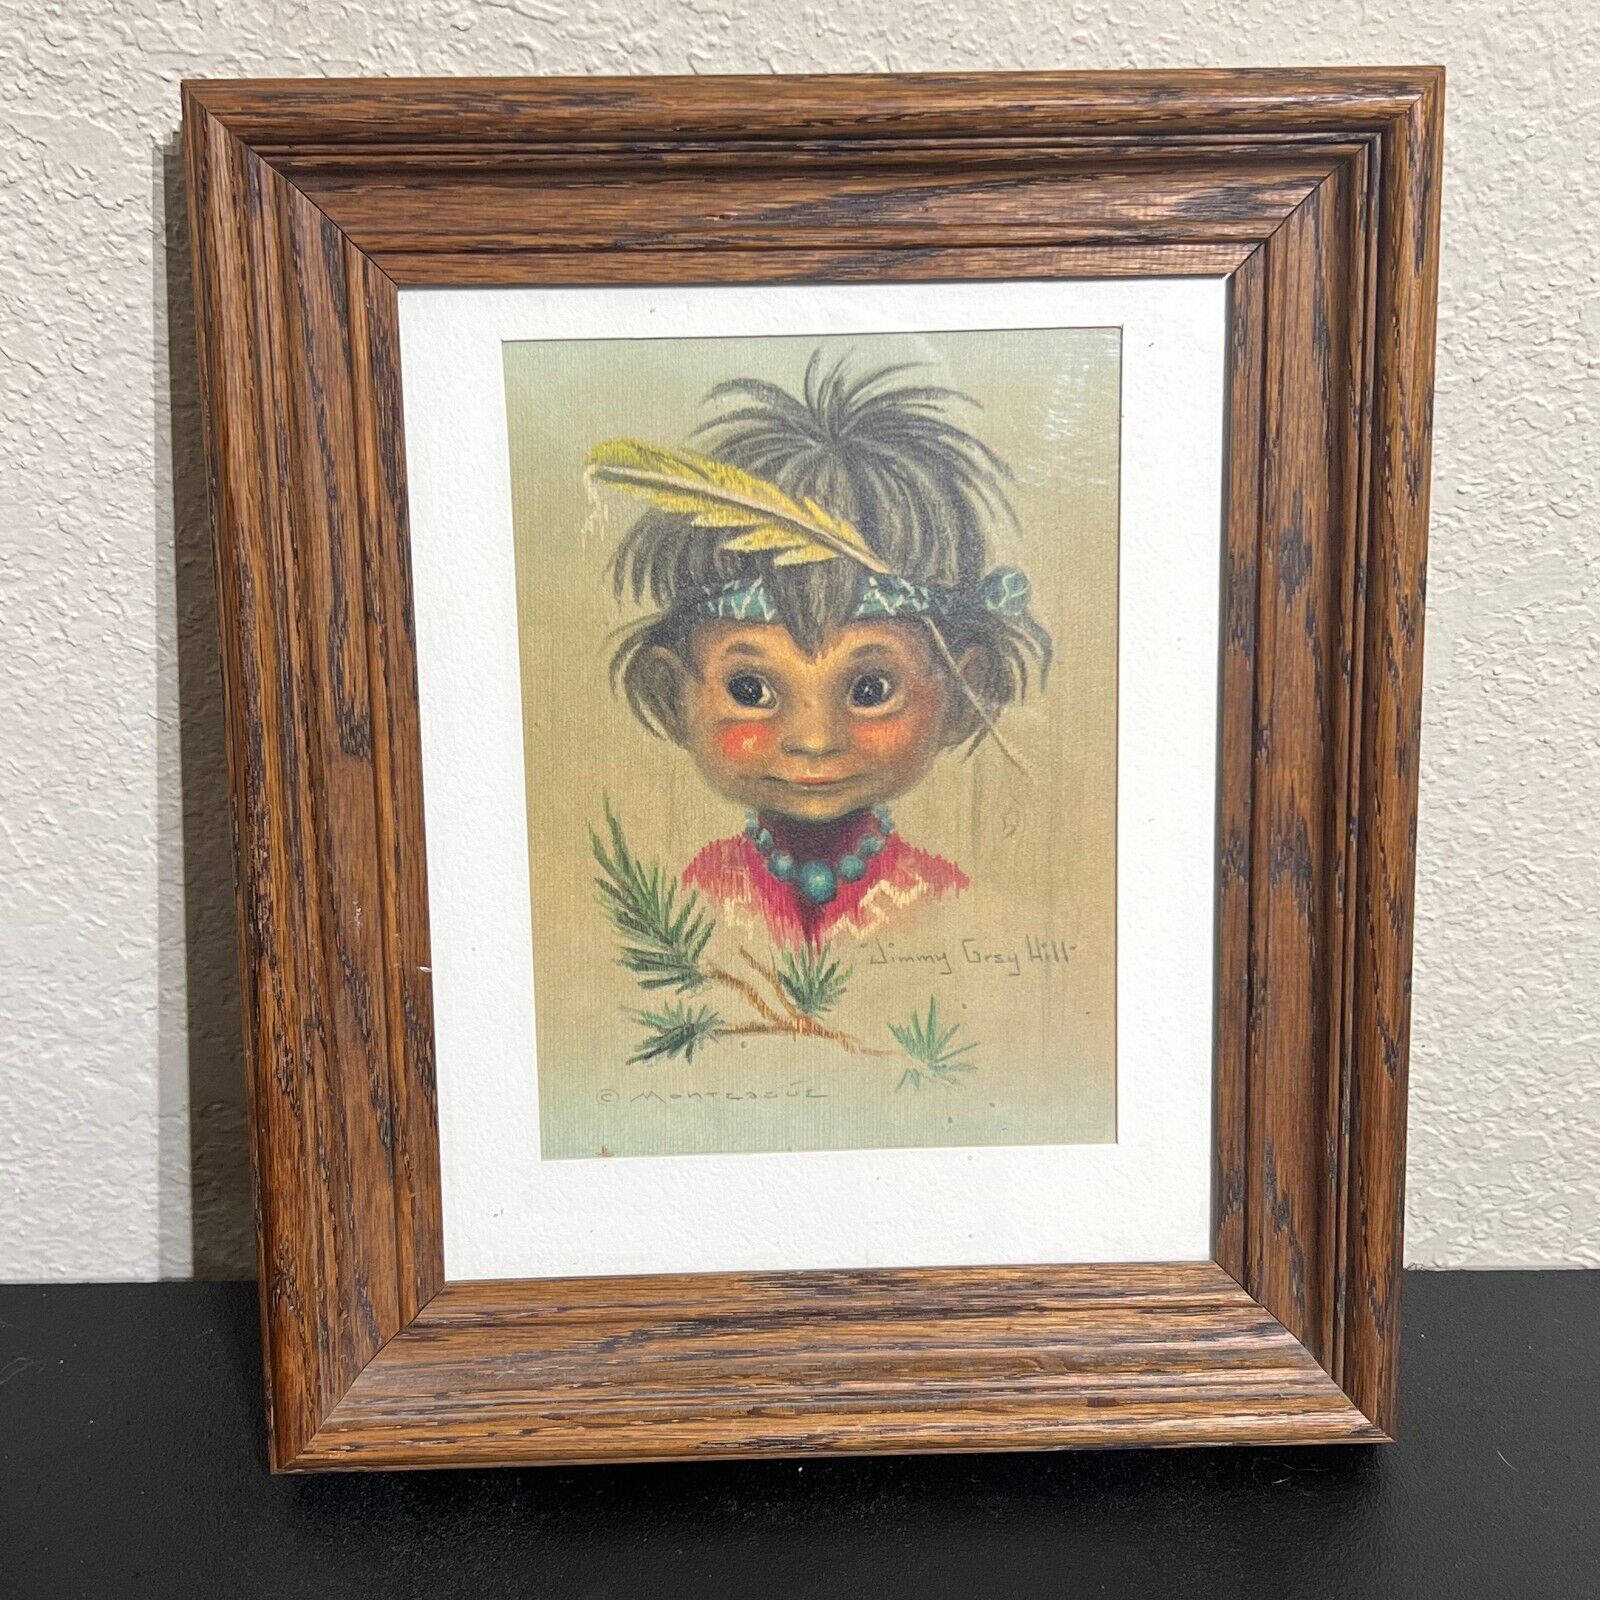 Vintage Indian Child Art By Monte Monteague Jimmy Grayhill - Colored Lithograph